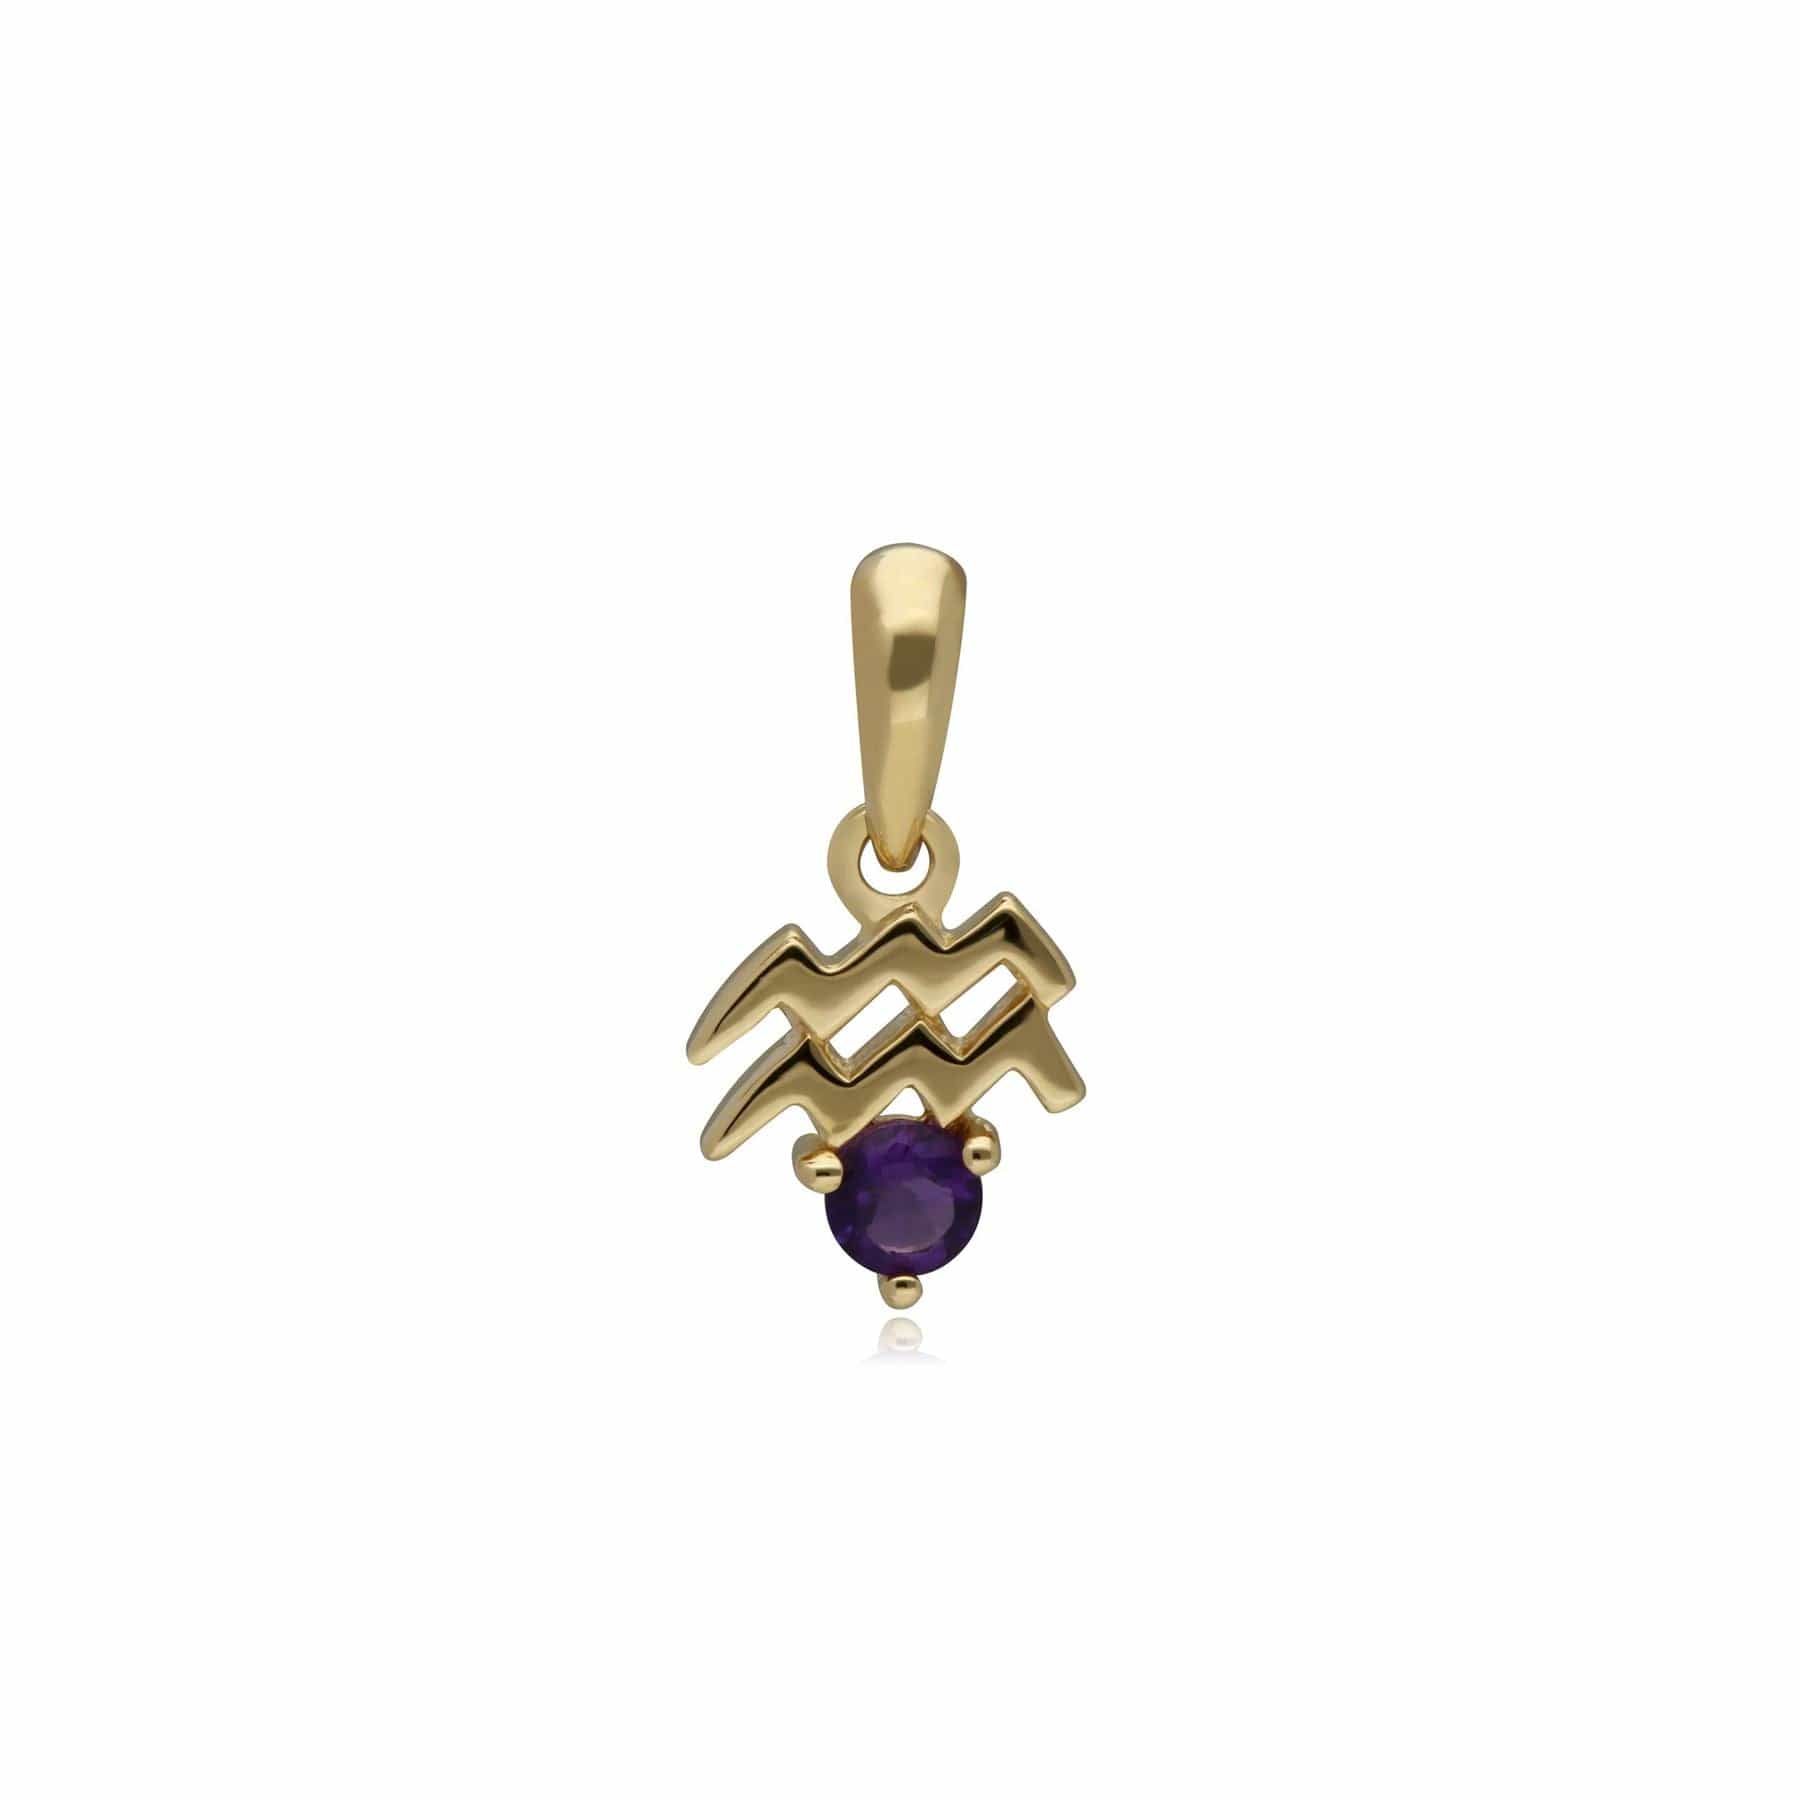 135P2005019 Amethyst Aquarius Zodiac Charm Necklace in 9ct Yellow Gold 5